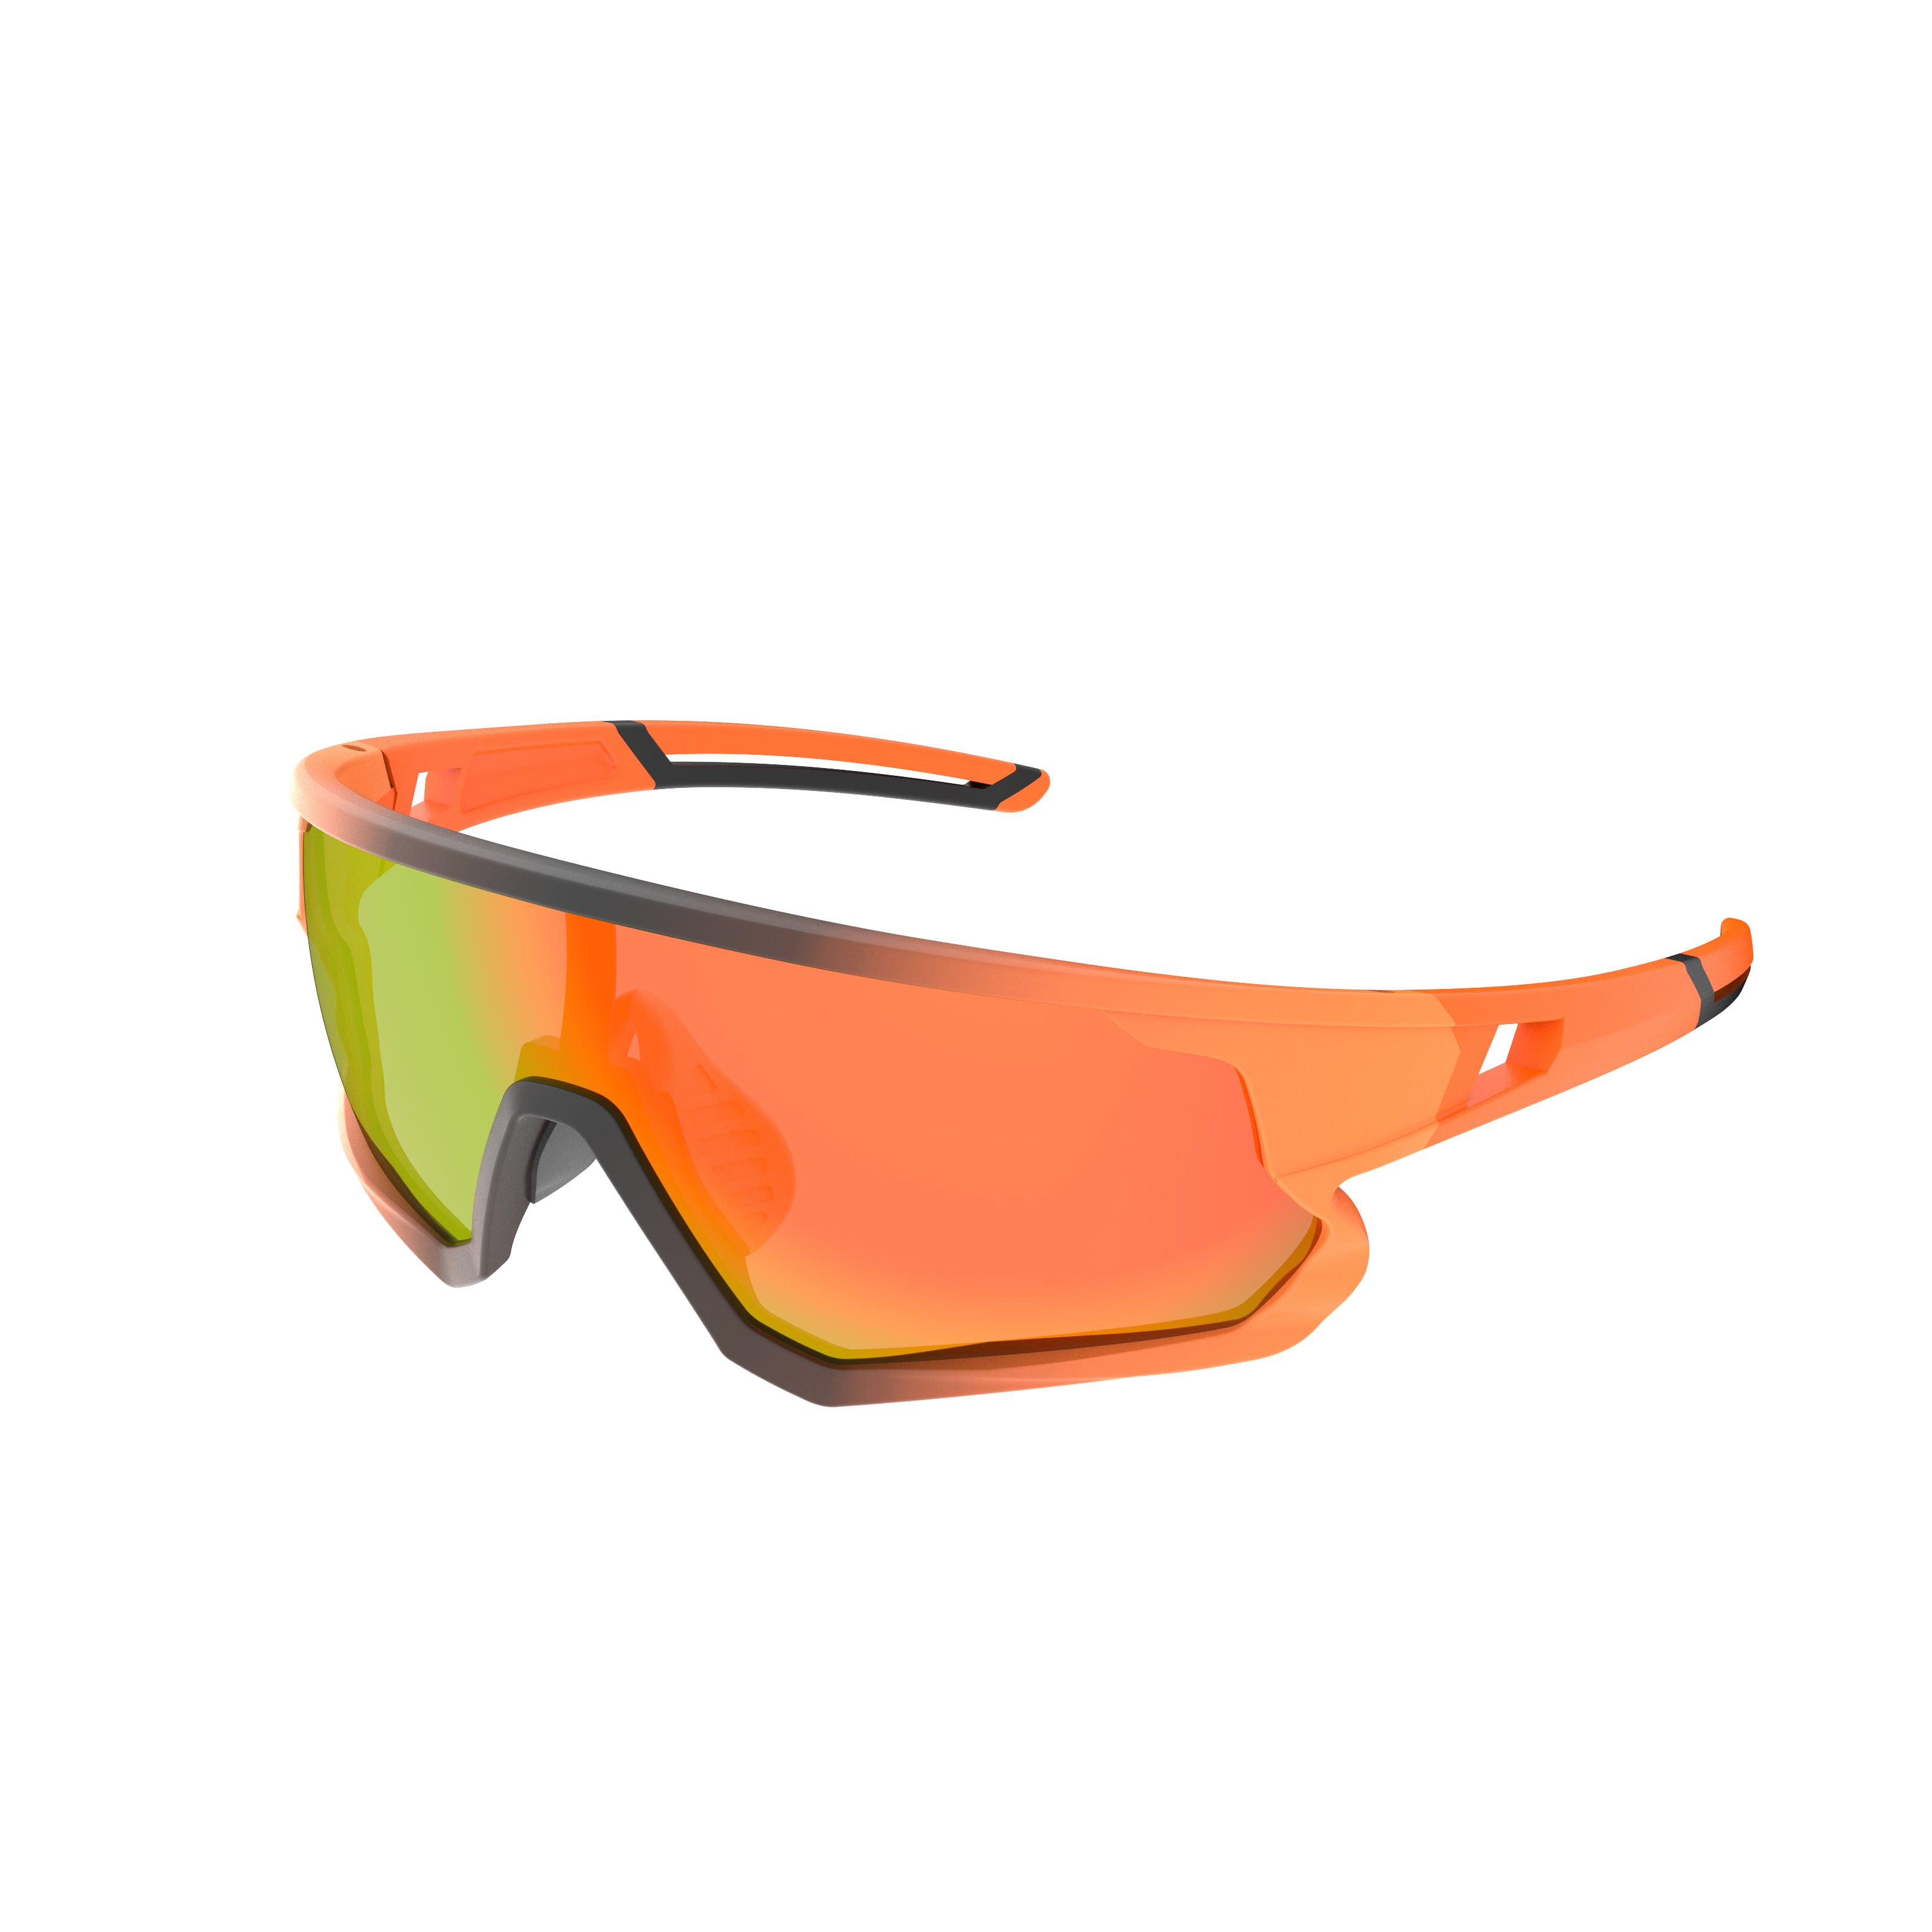 Polarized Cycling Glasses,Sports Sunglasses for Men and Women, UV Protection Glasses for Running, Fishing, Driving